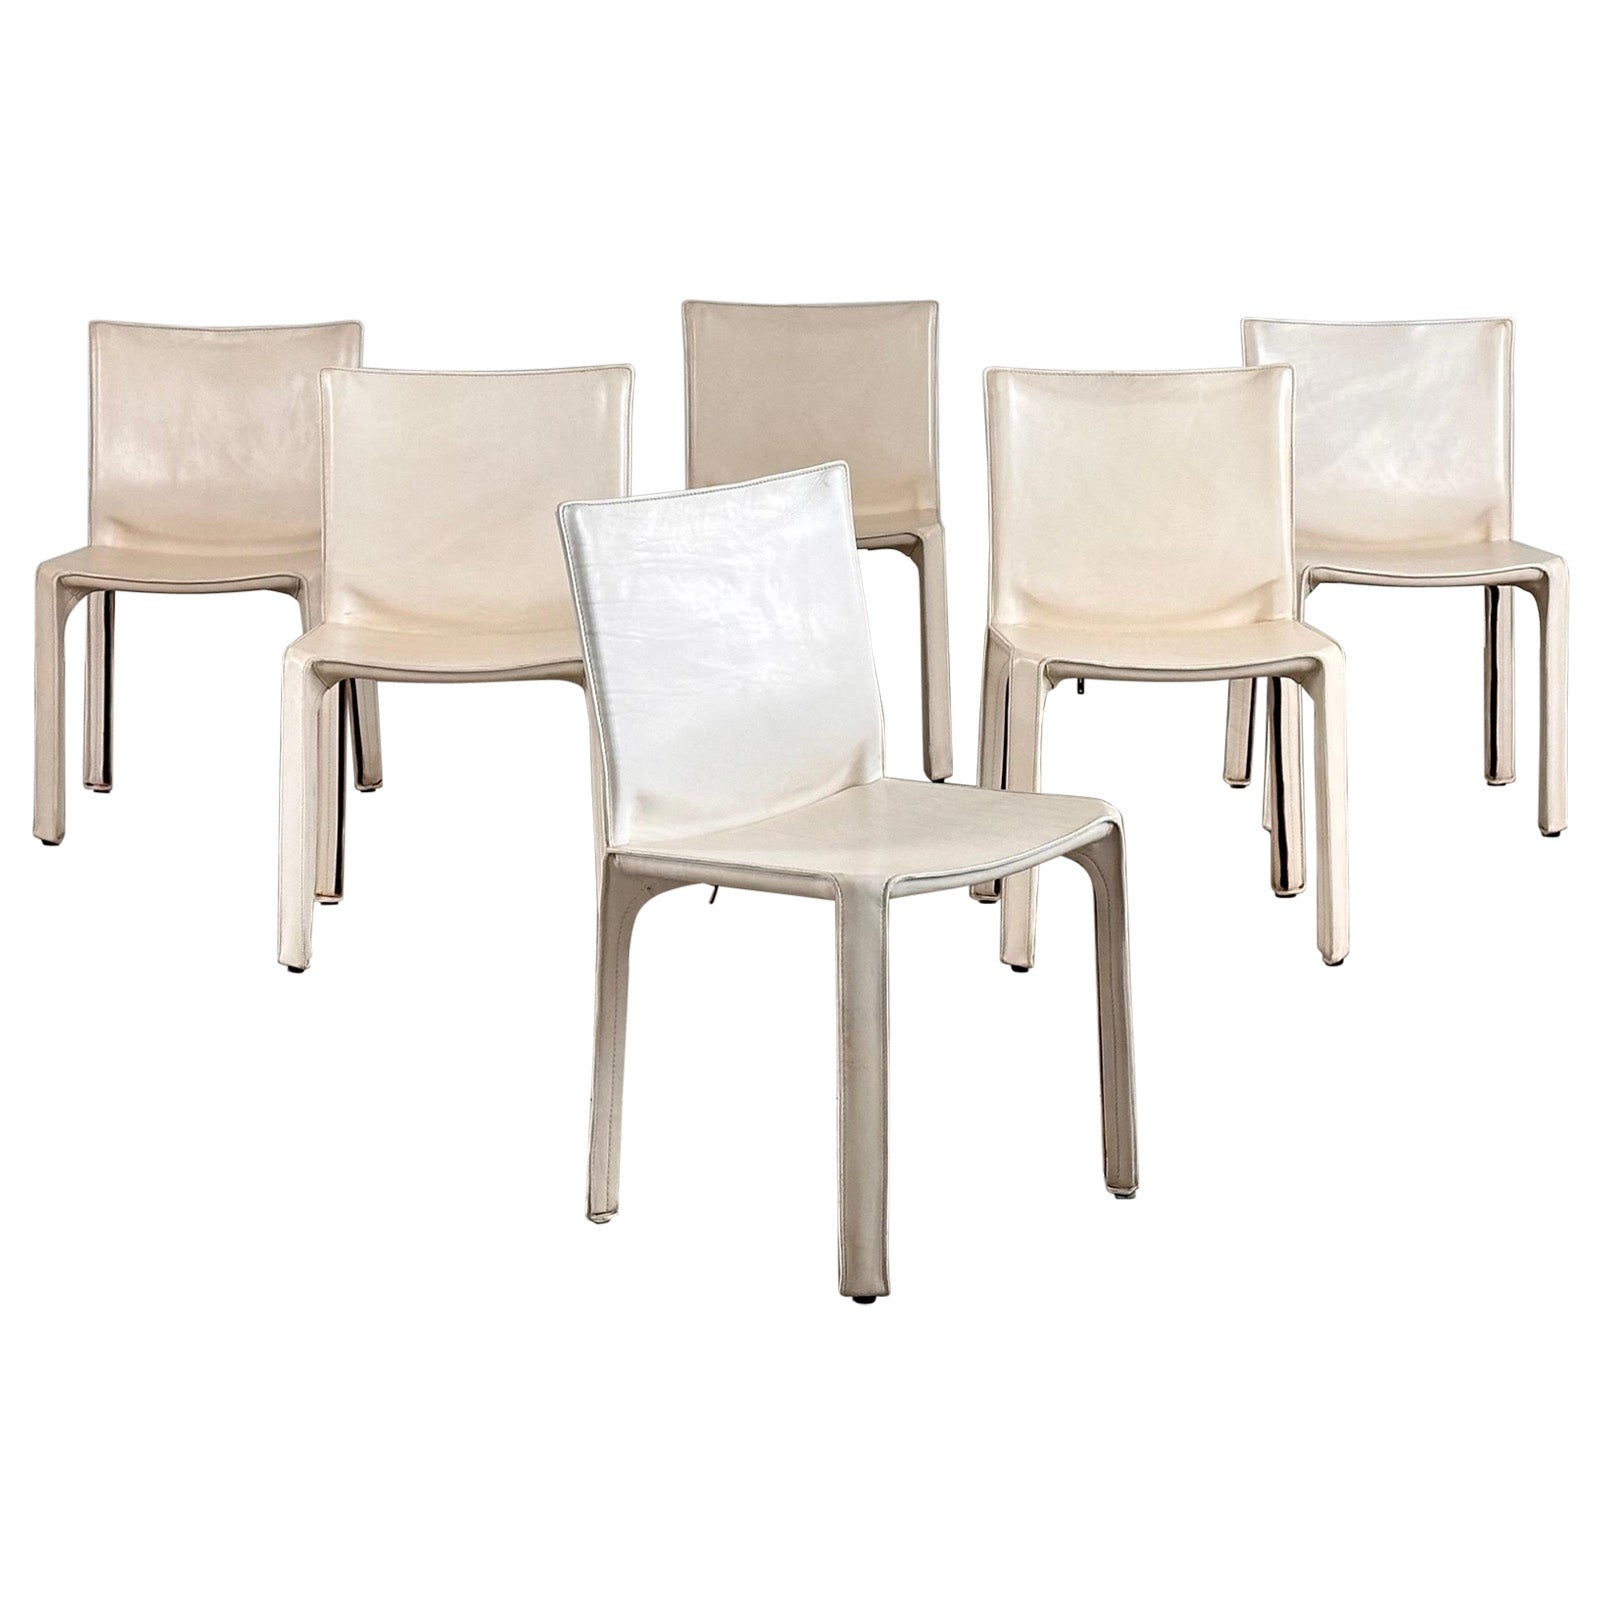 Set of Six CAB 412 Chairs by Mario Bellini for Cassina in white Leather, 1970s